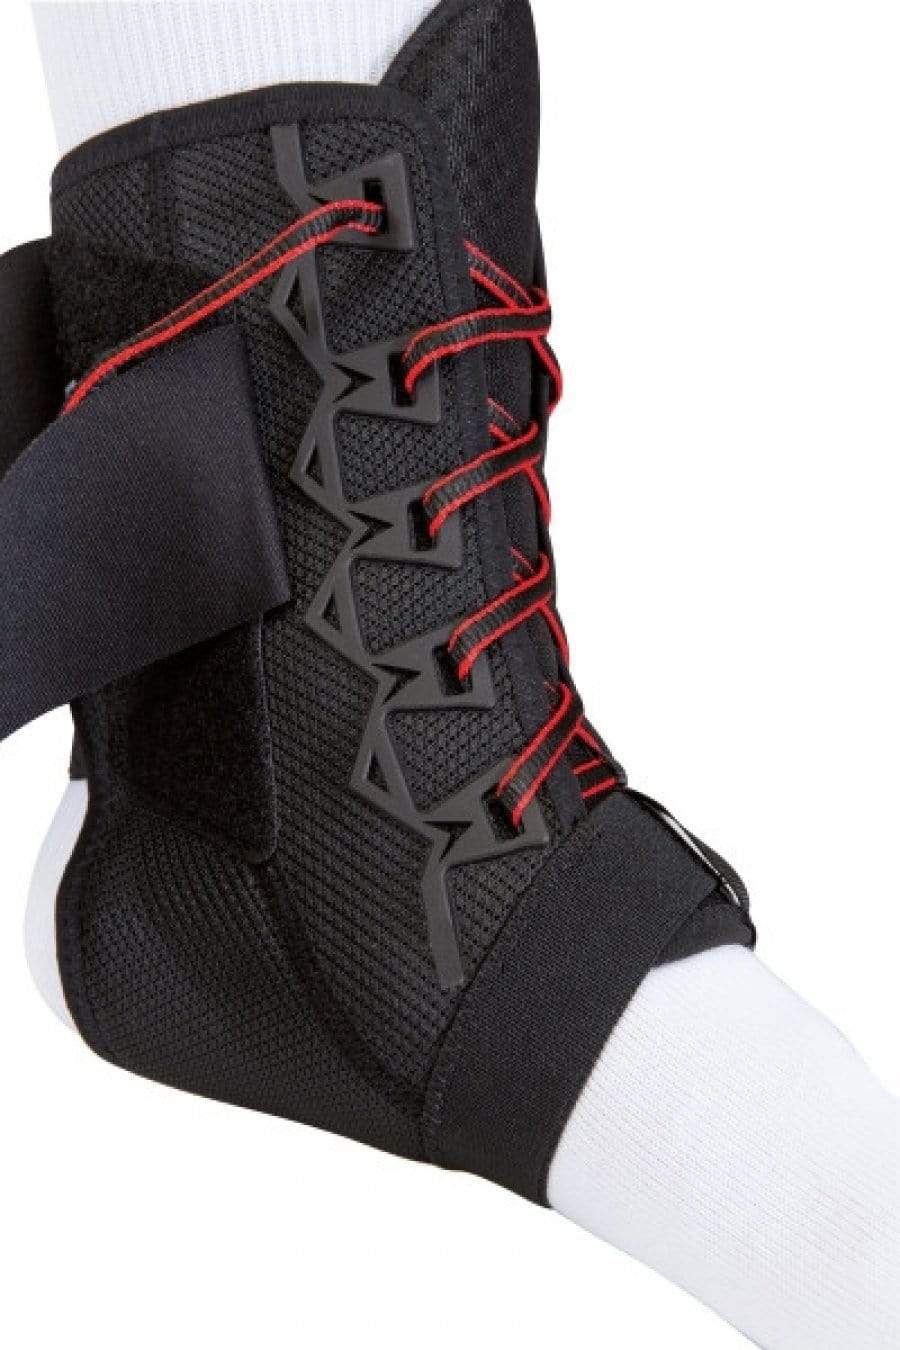 Mueller The One Premium Ankle Brace Lace Up